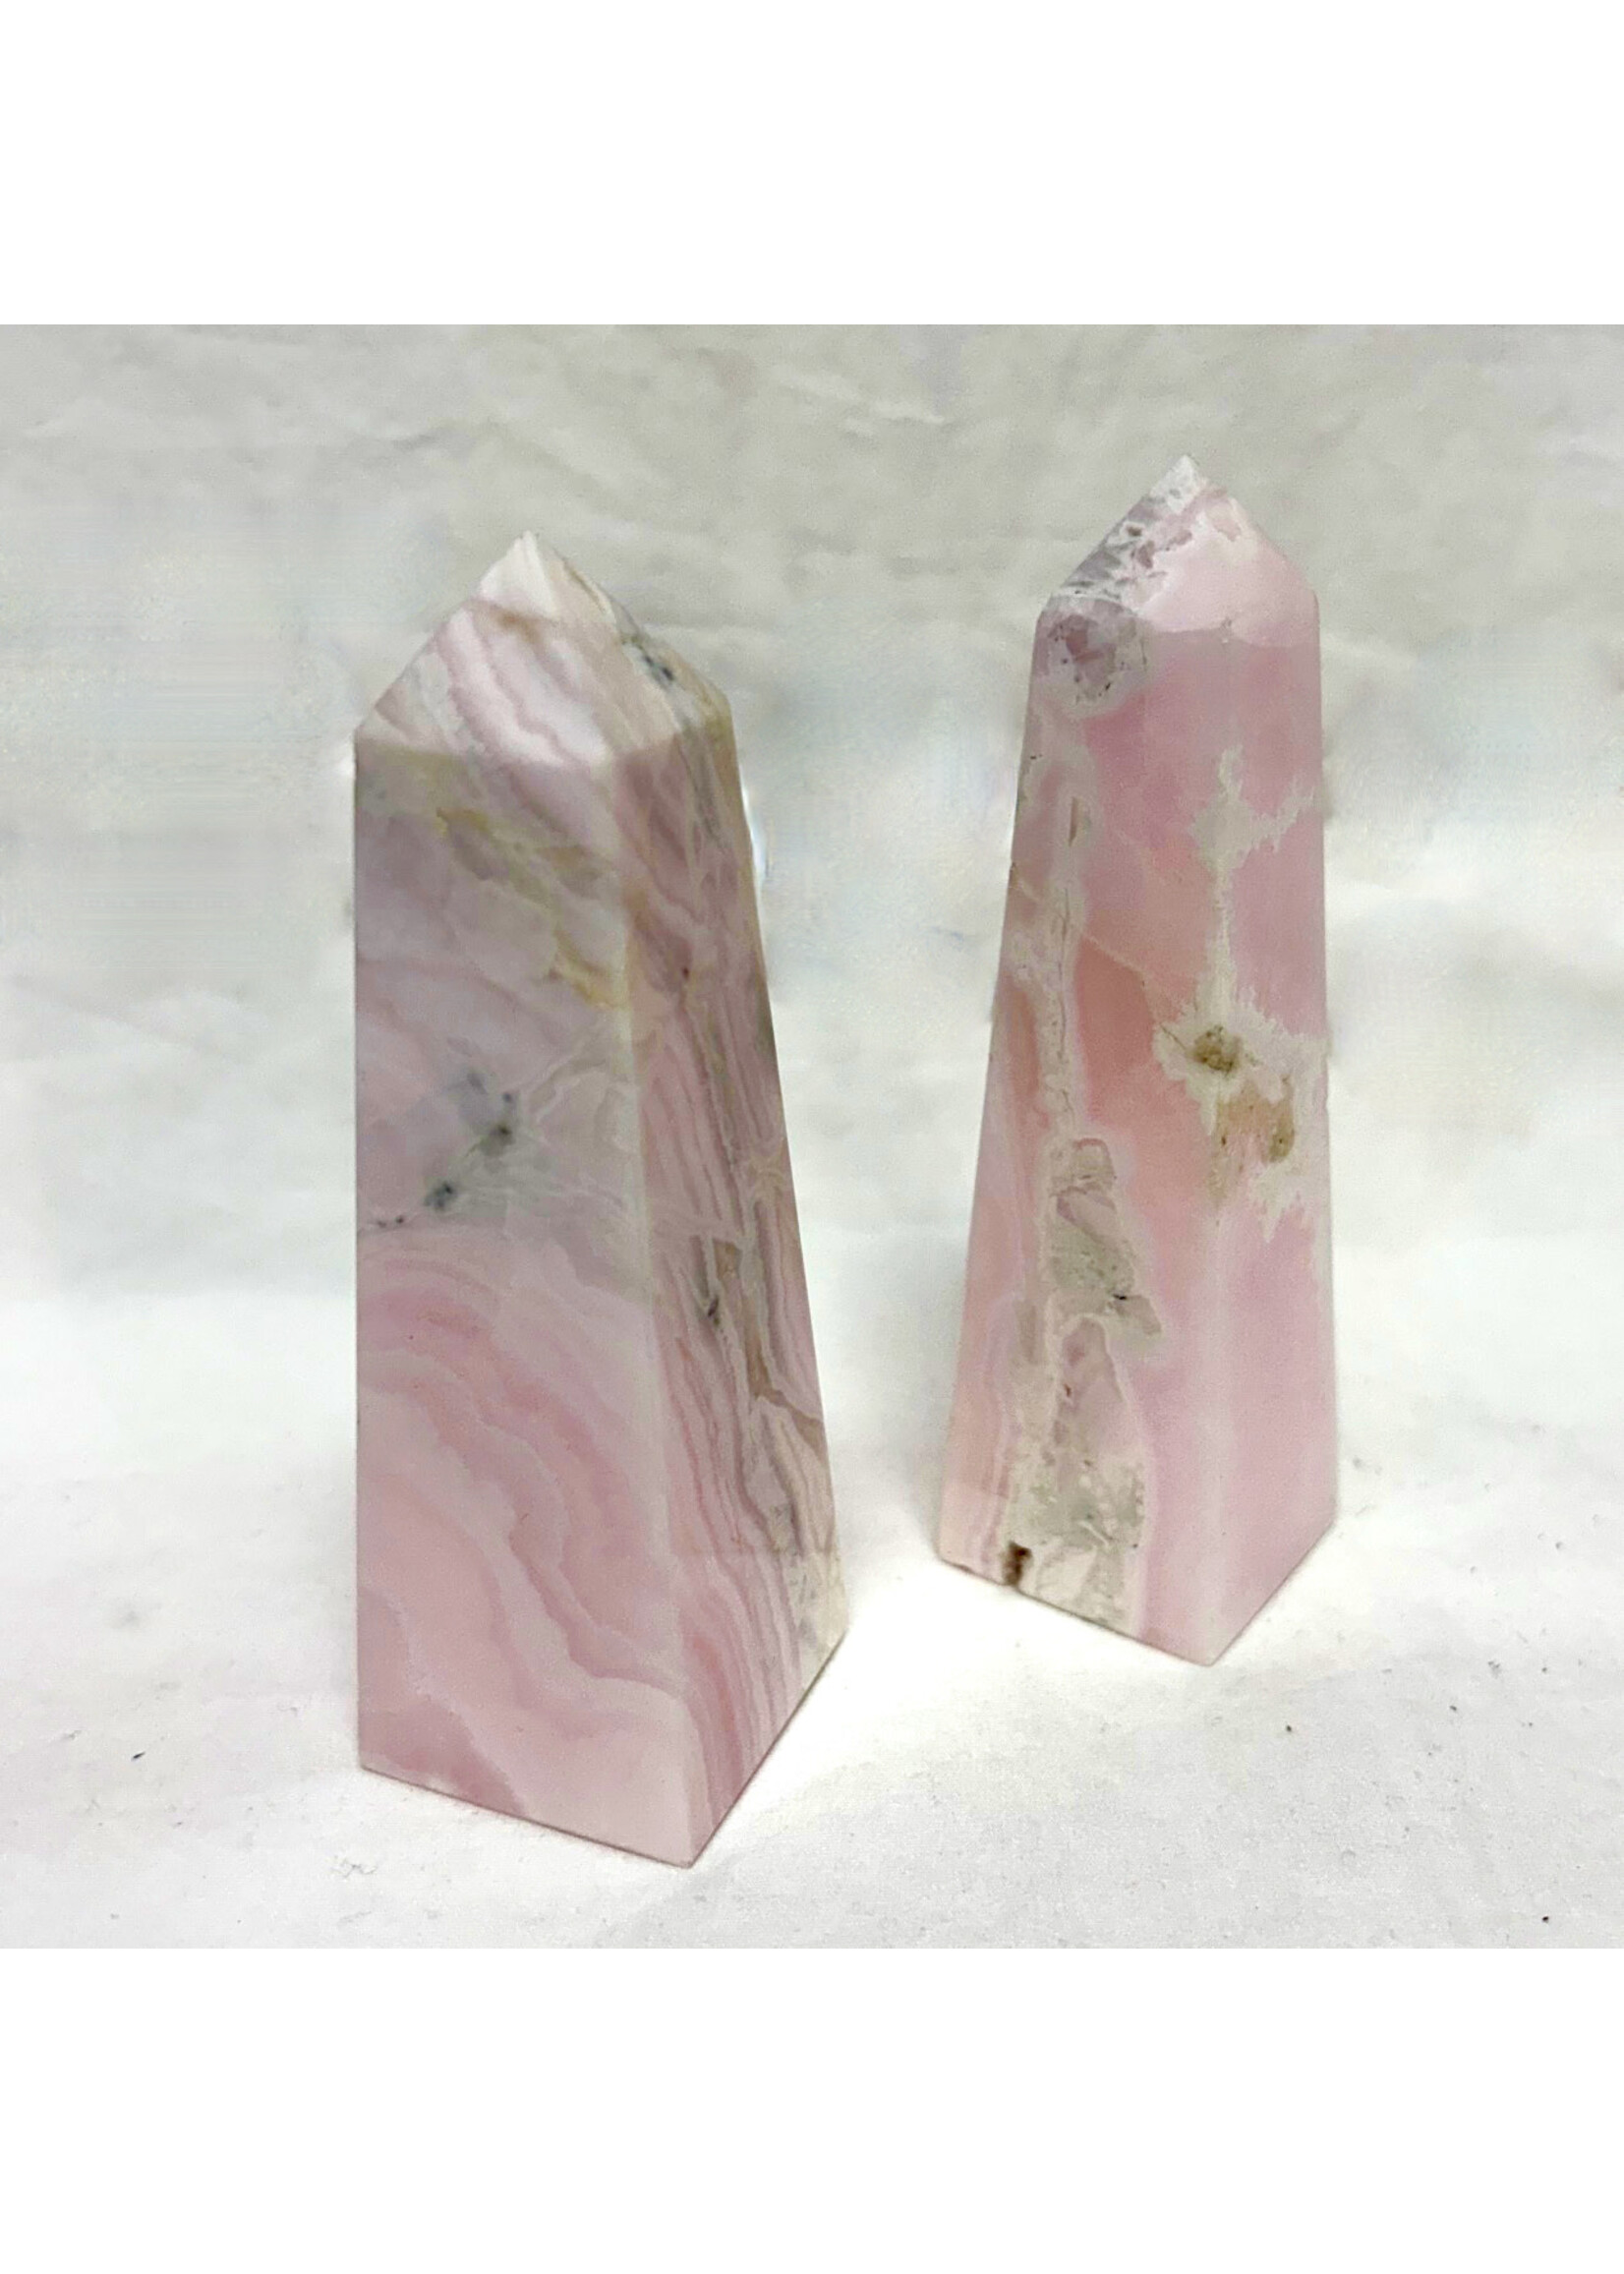 Mangano Calcite Obelisks for elevated love and compassion